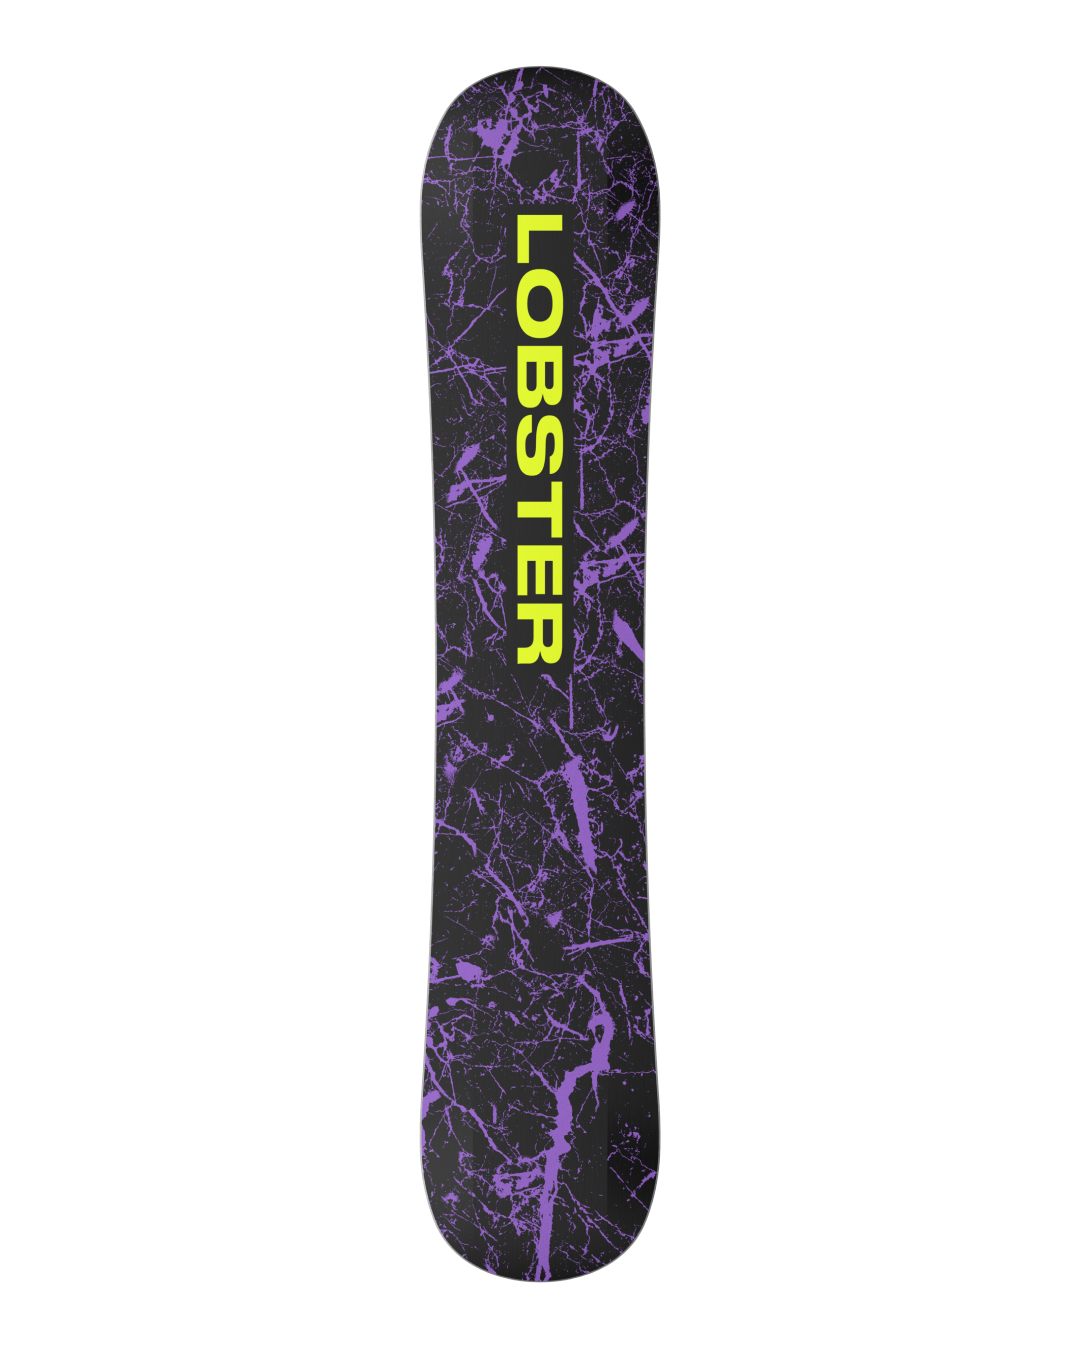 Airmaster lobstersnowboards 2023-2024 snowboarding product image